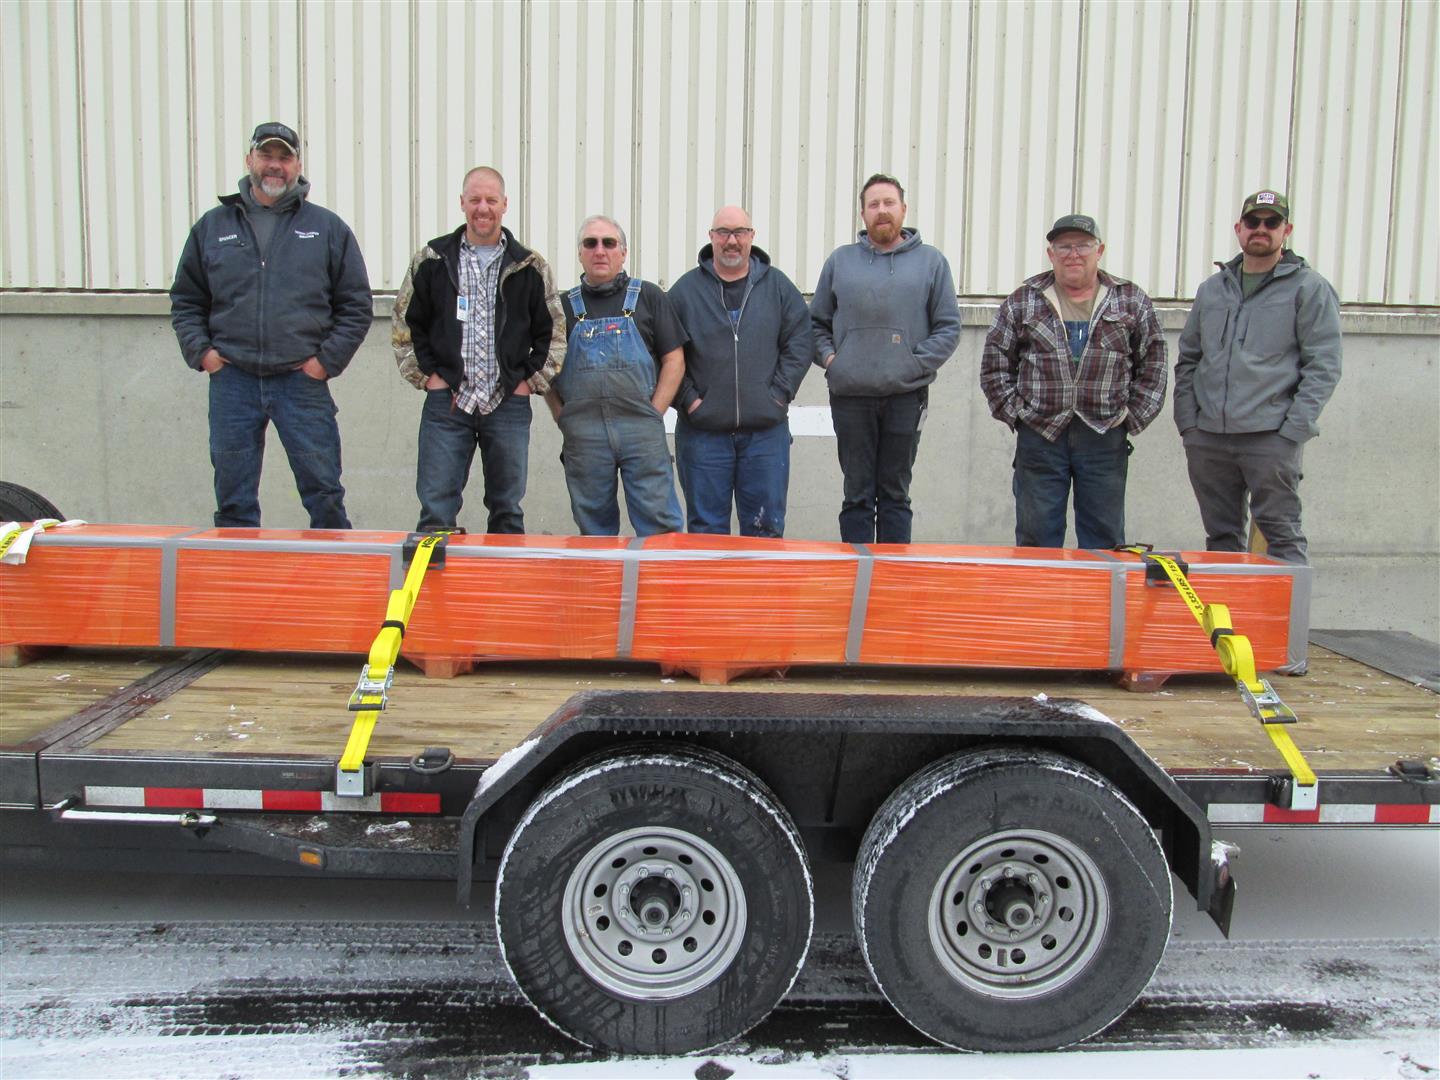 Spencer Esch (left), maintenance worker and equipment operator at Crystal Dam, drove more than 2,200 miles to pick up the pieces made by Grand Coulee machinists (pictured second from left): Justin Miller, Michael Dennis, Keith Faul, Kyle Kuhlmann, Timothy Hagerup and Michael Gause.